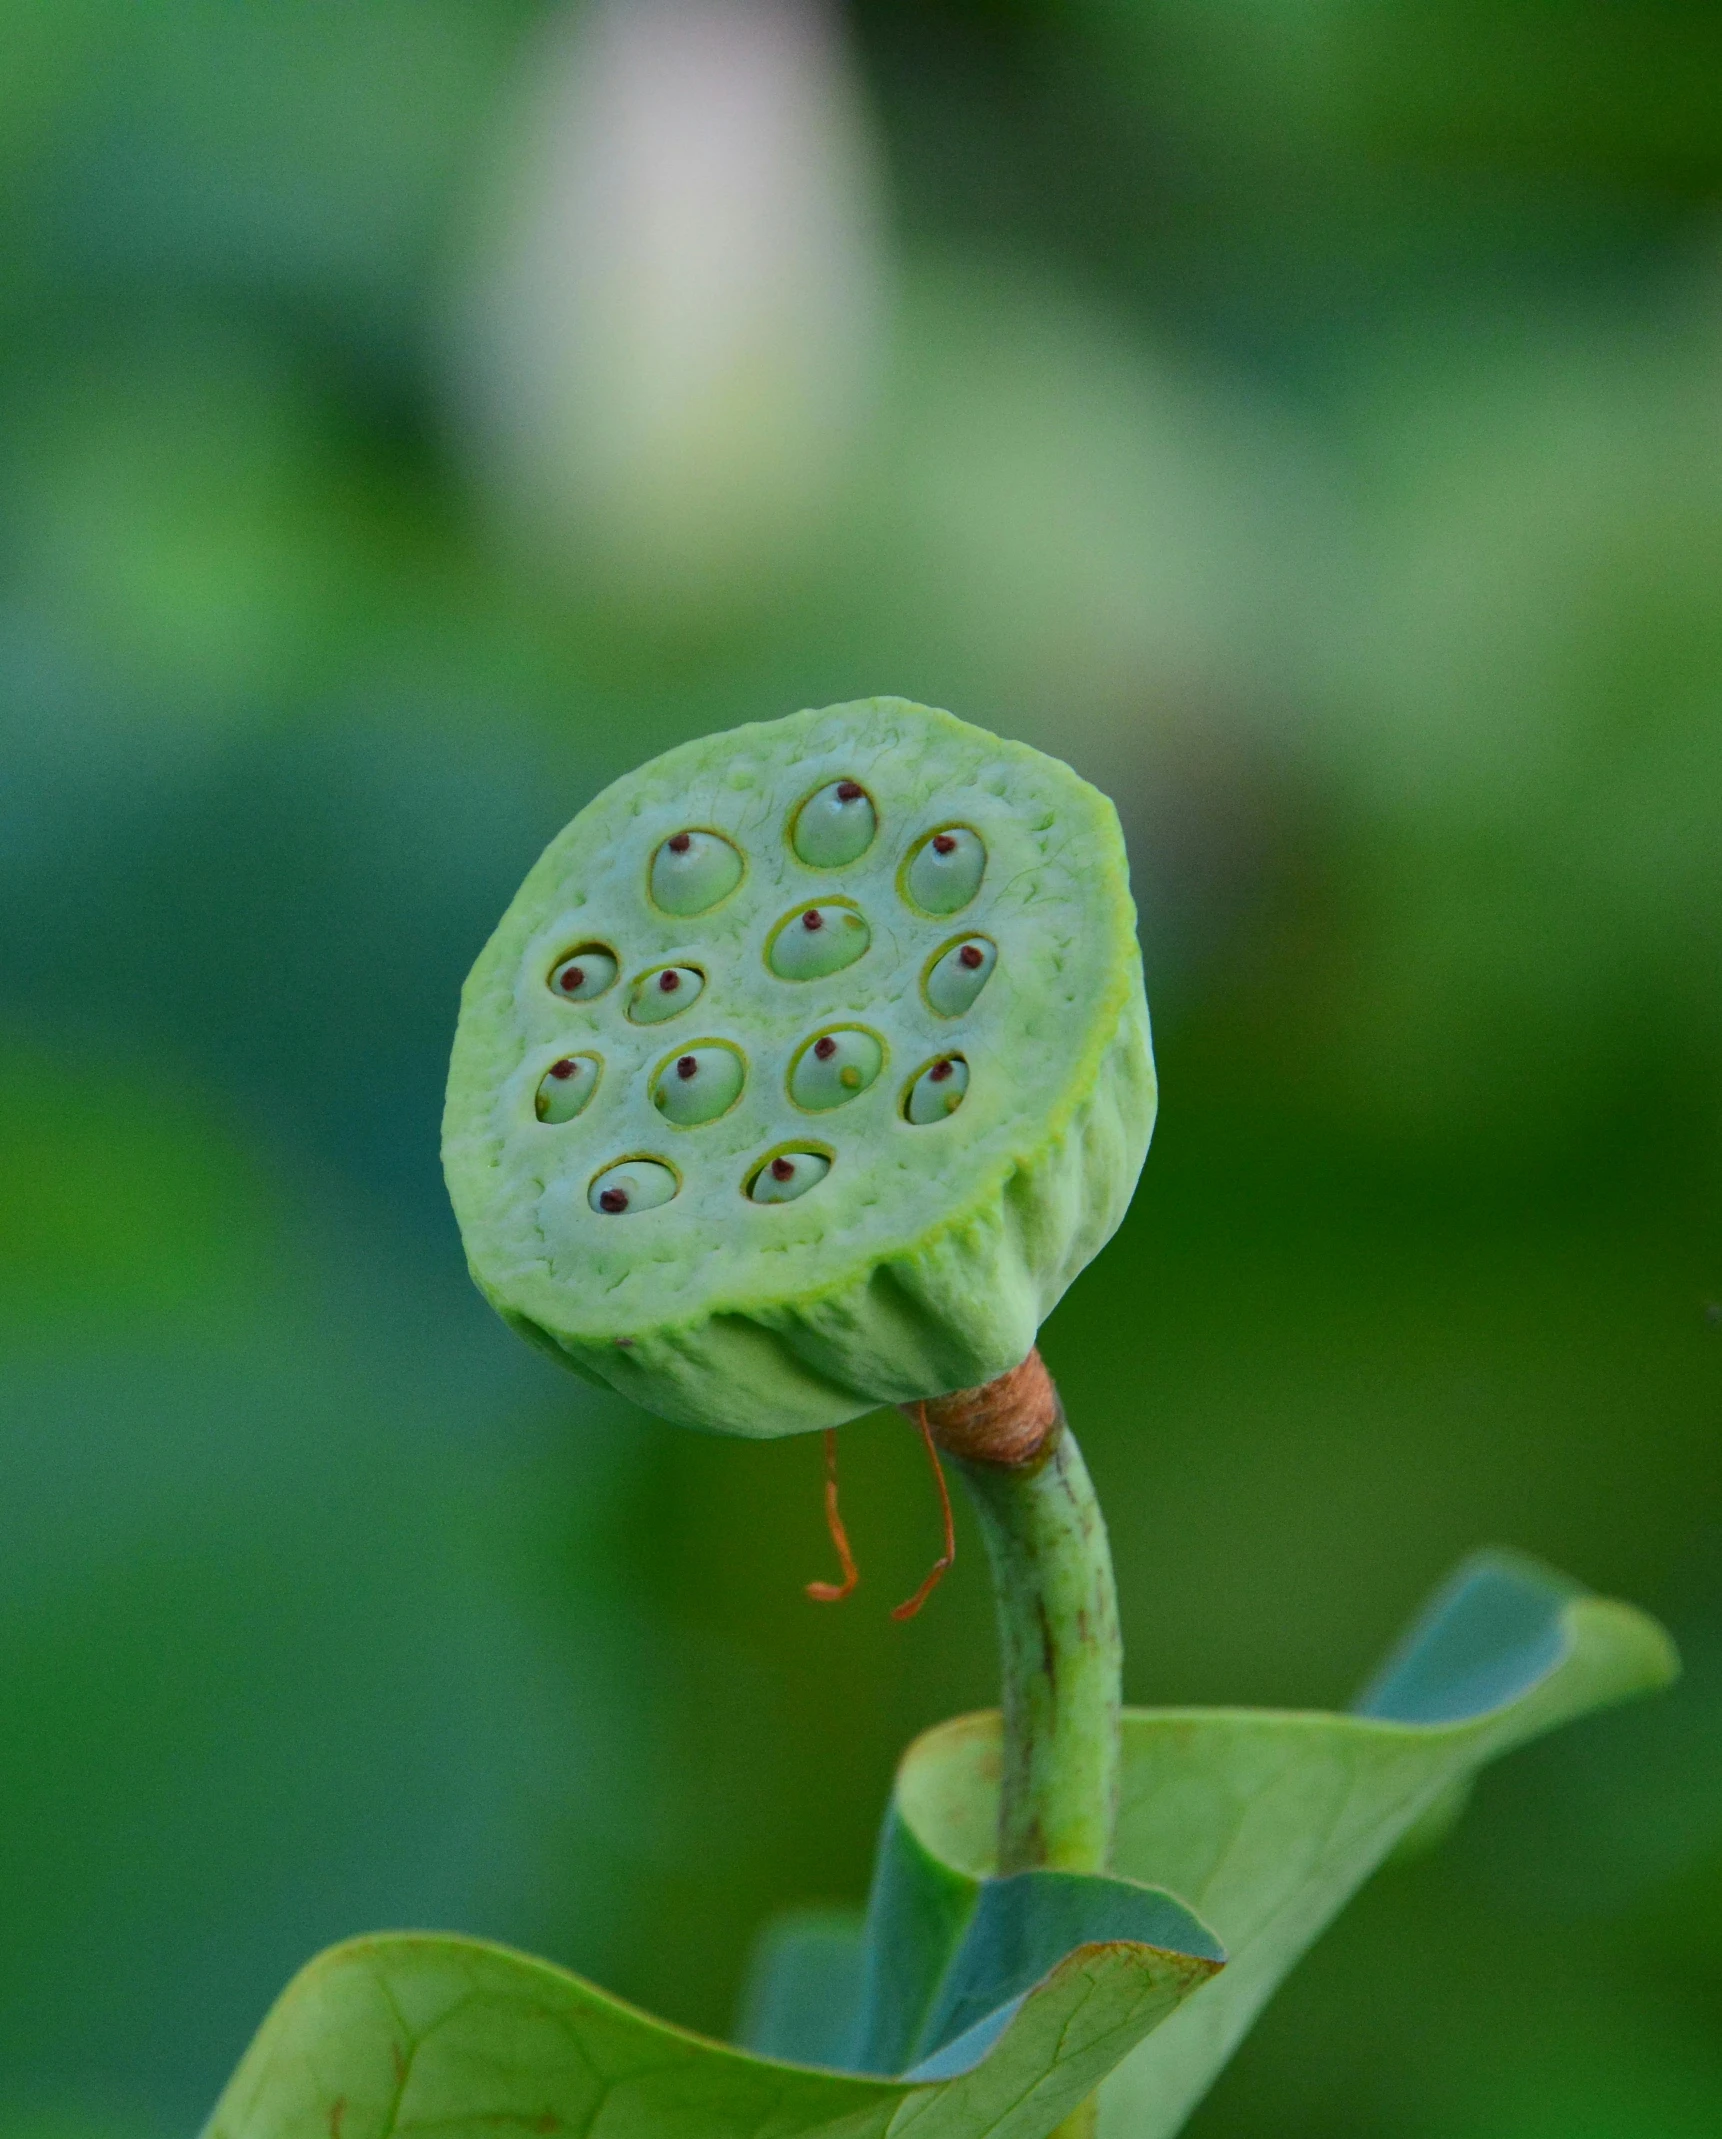 a green leaf is shown with several holes in it